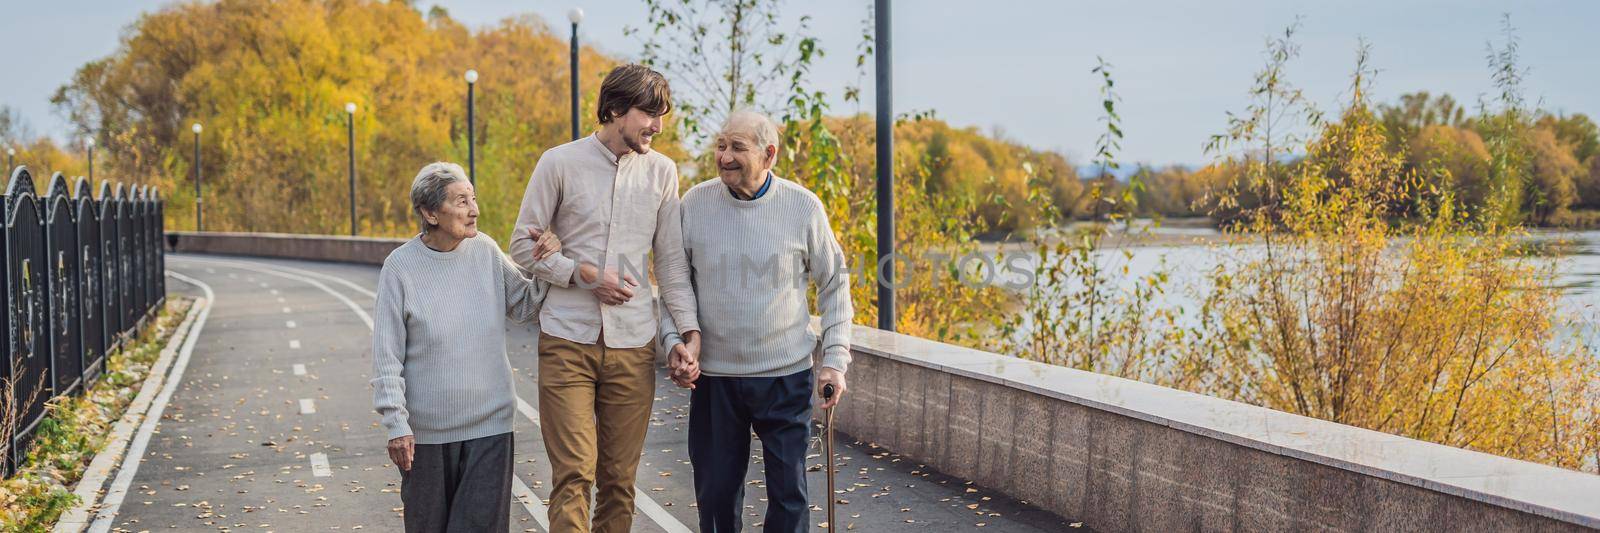 BANNER, LONG FORMAT An elderly couple walks in the park with a male assistant or adult grandson. Caring for the elderly, volunteering by galitskaya